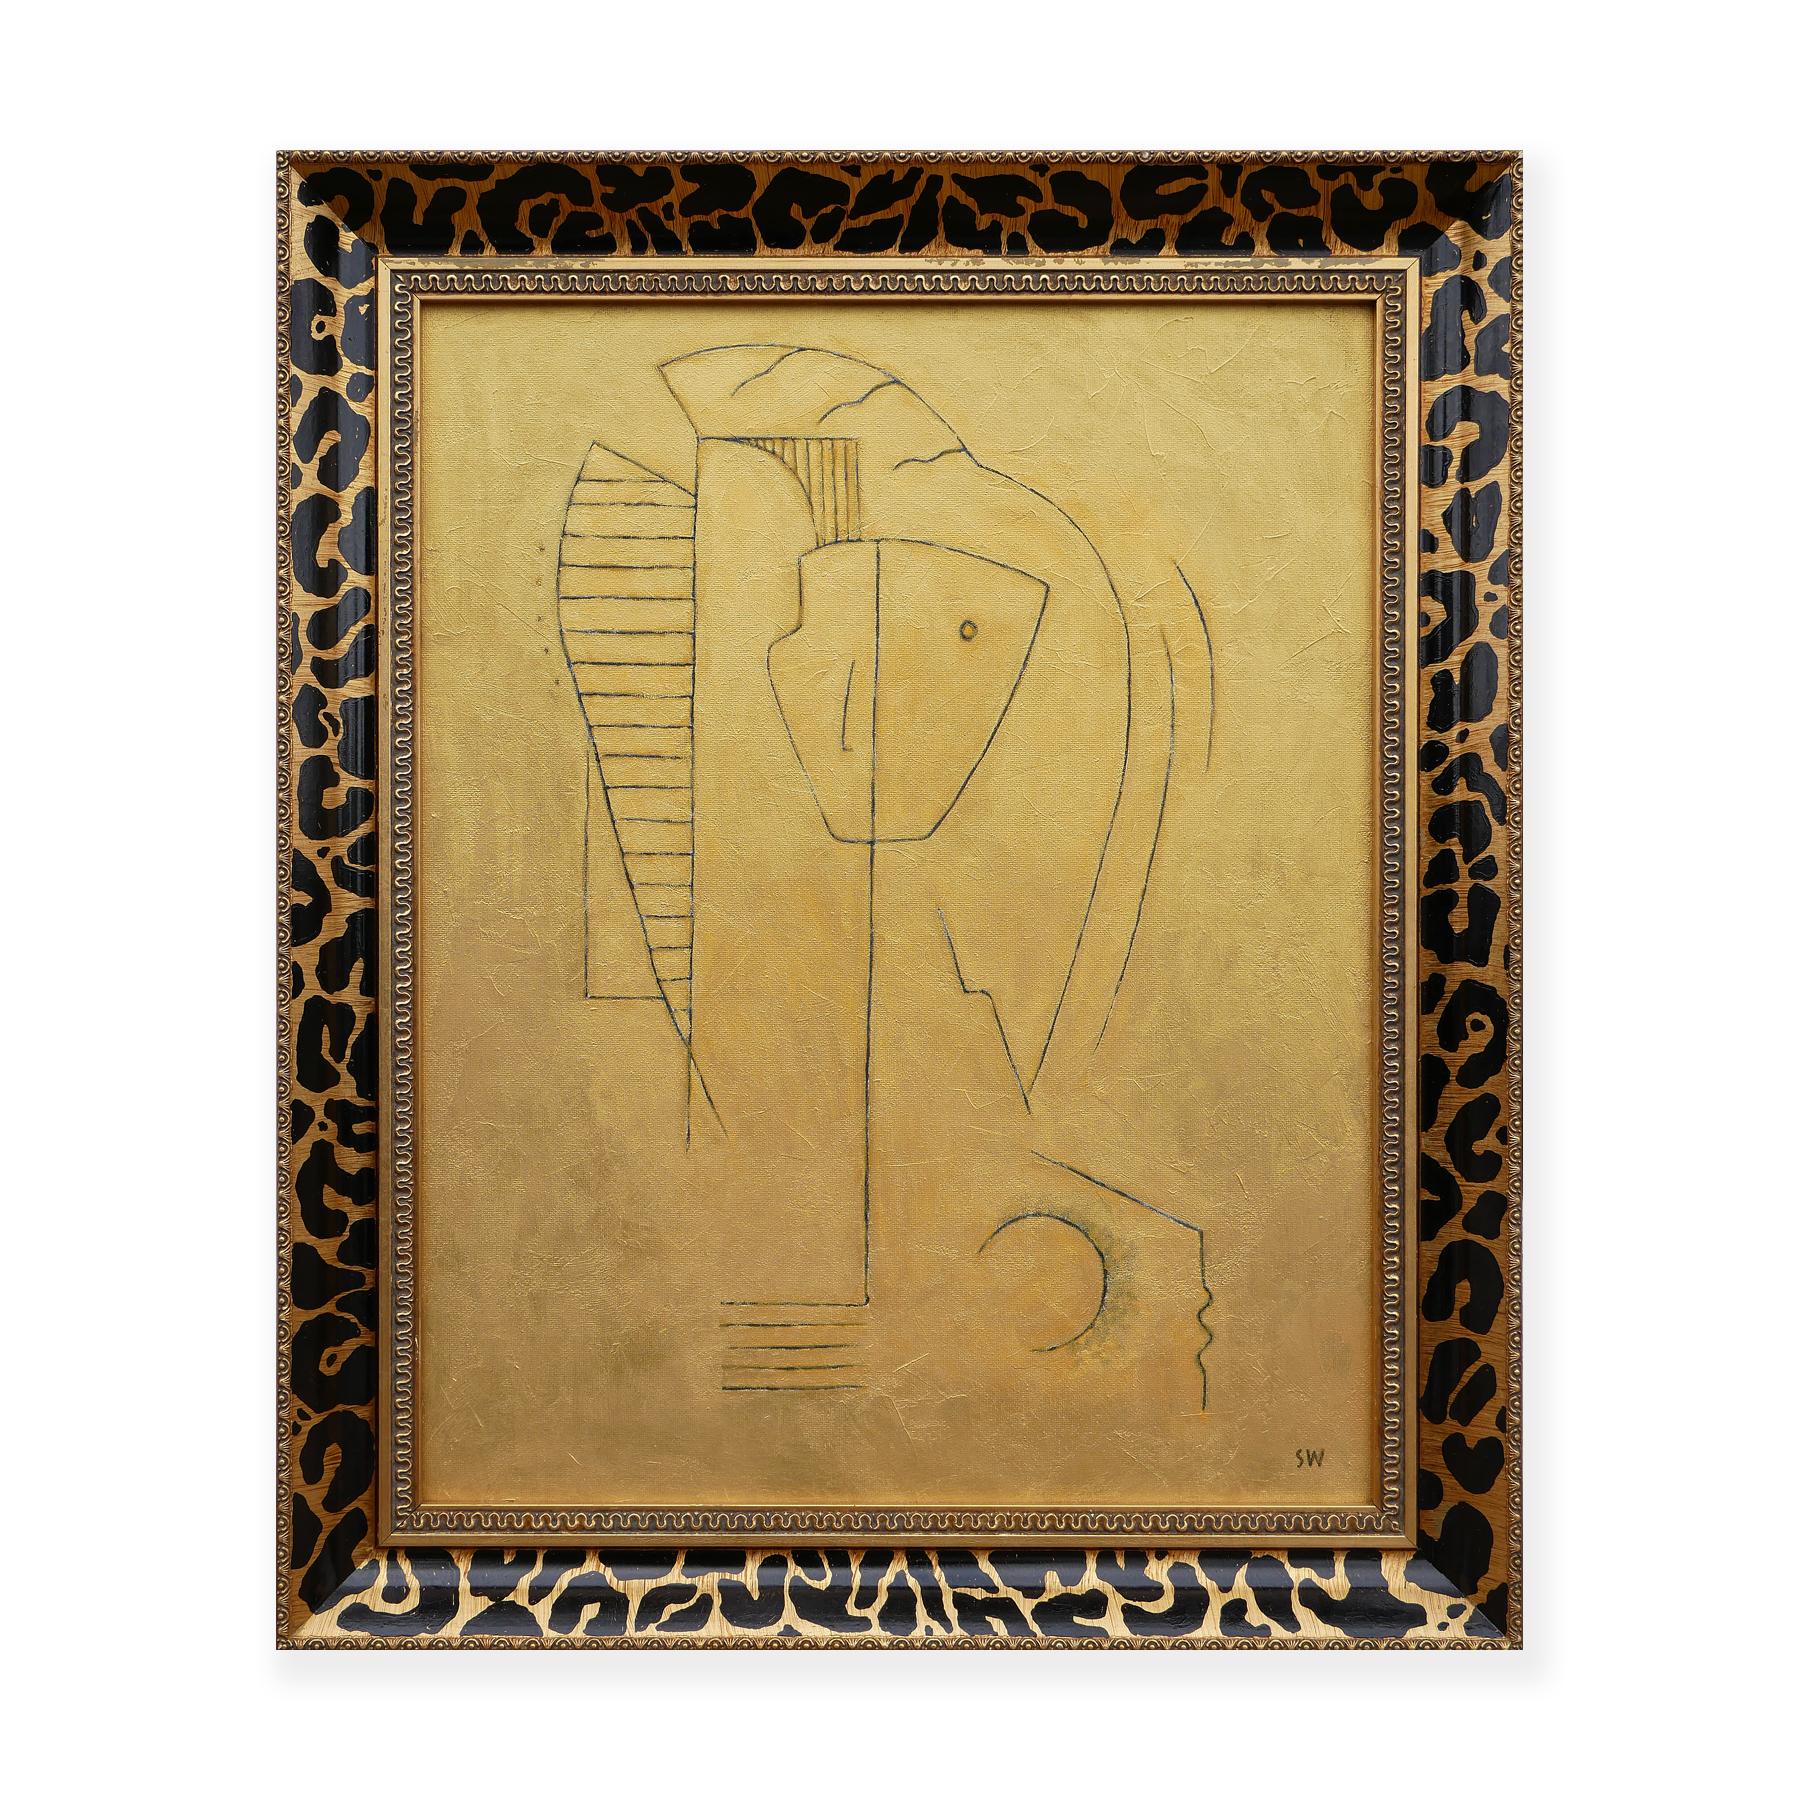 Contemporary abstract painting by Houston, TX artist Scott Woodard. The work depicts minimalist lines that form an abstracted figure in a profile position. Signed by the artist at the bottom right corner. Framed in a black and gold leopard-printed